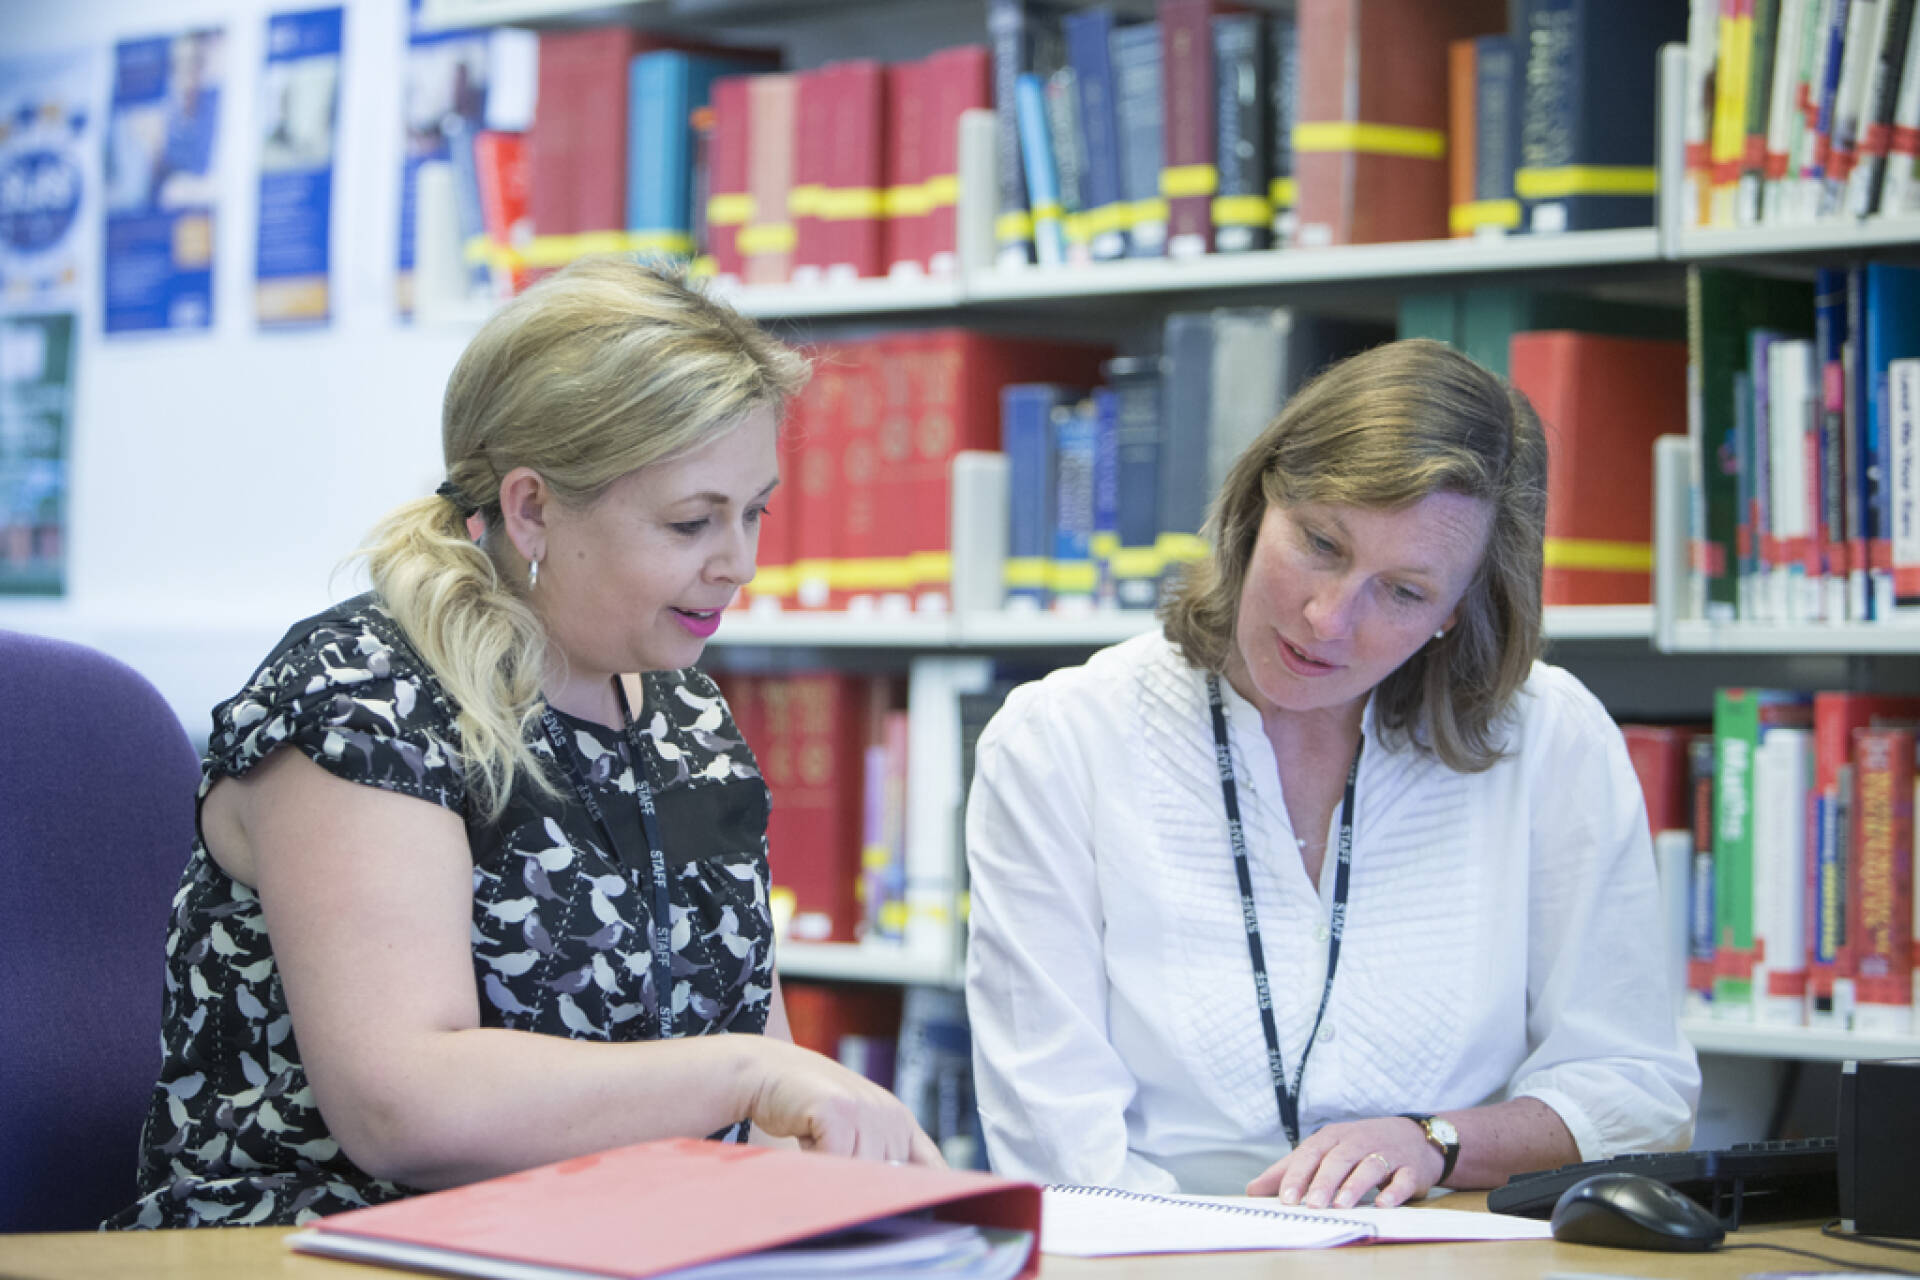 Two female colleagues studying notes in a notebook with books on library shelves in background